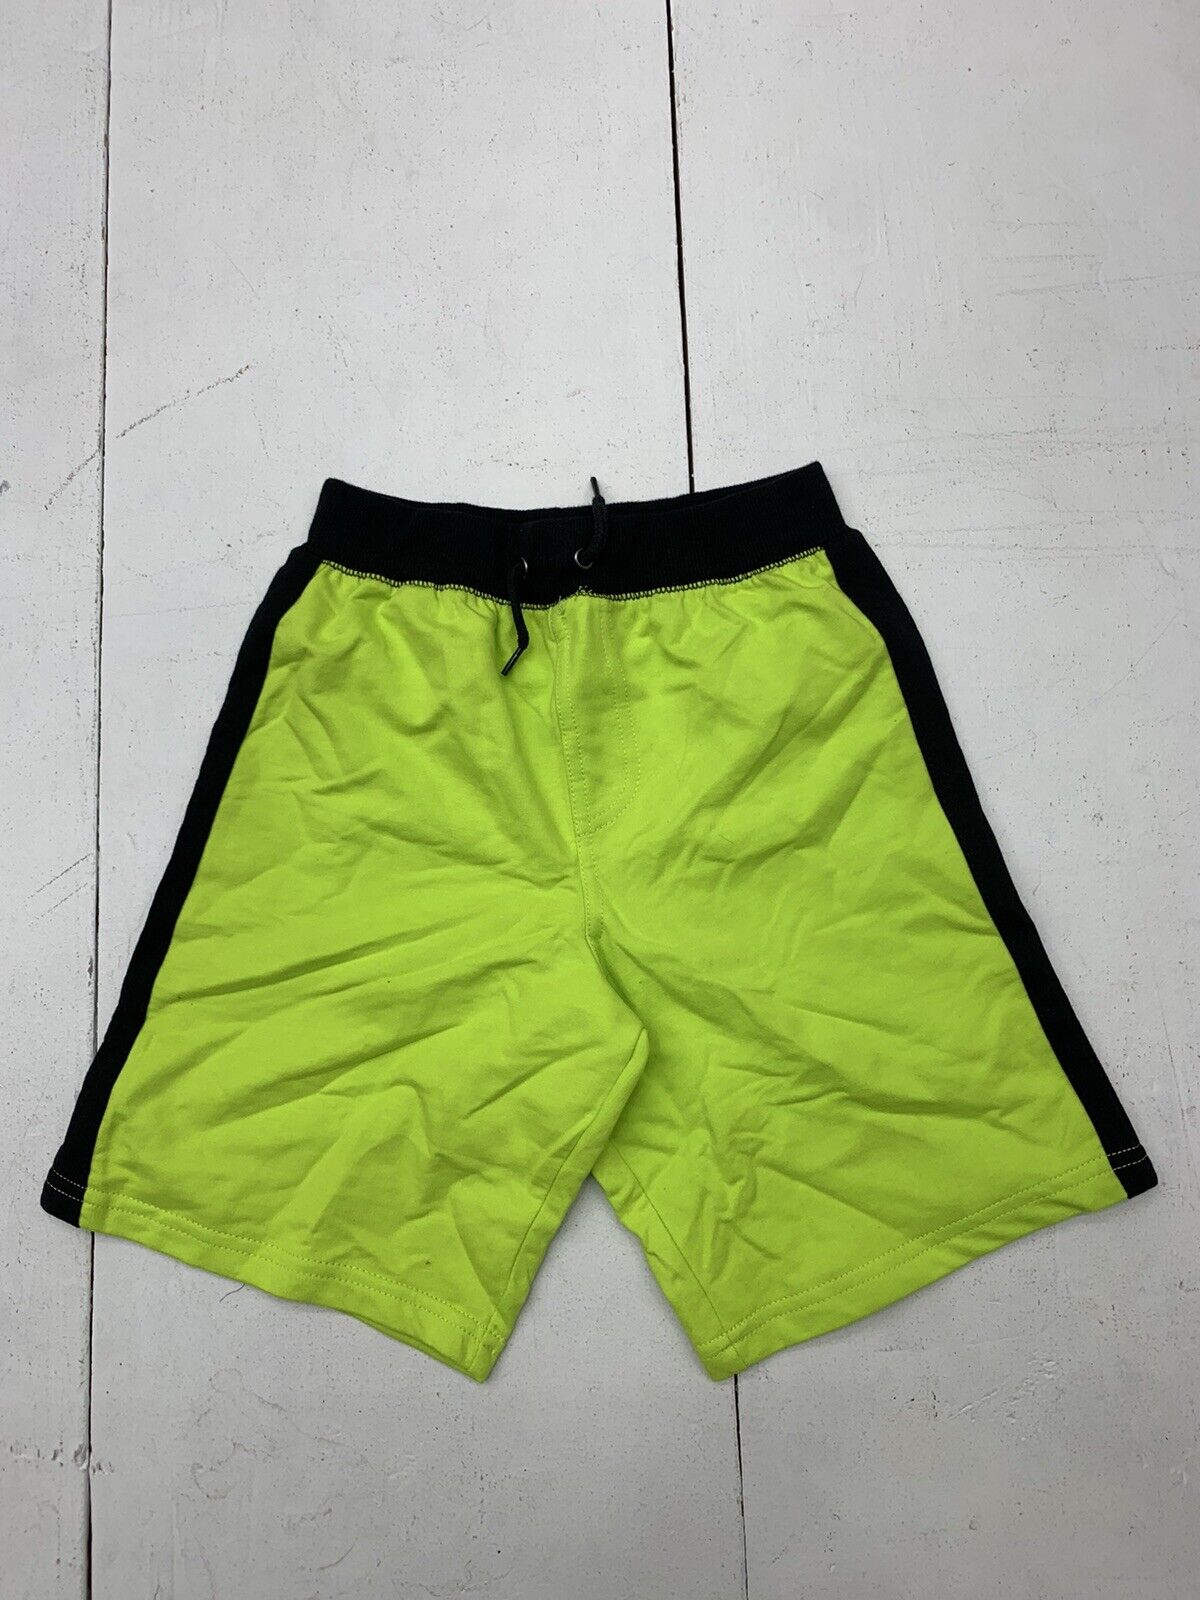 Off Campus Boys Neon Green Sweat Shorts Size 5/6